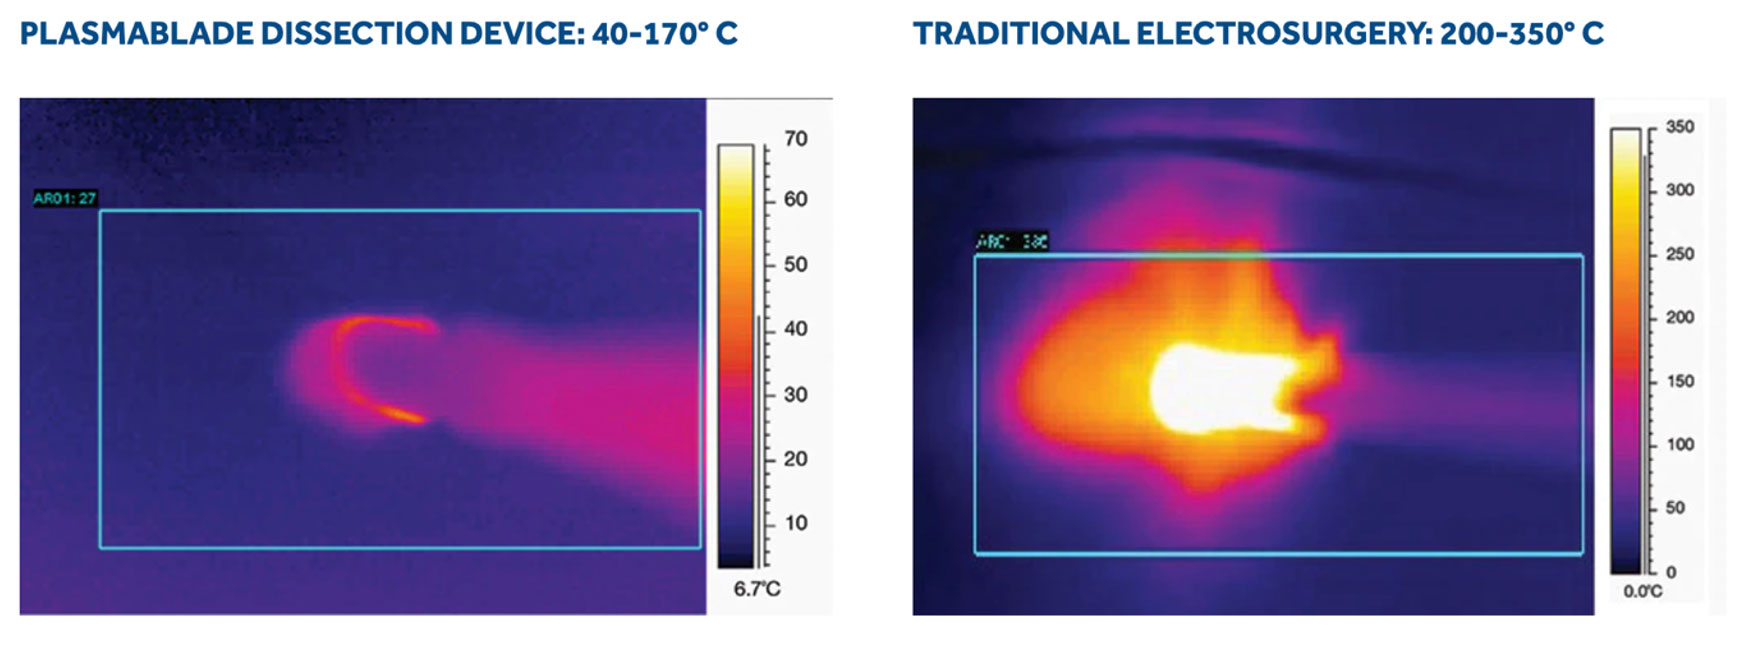 Plasmablade Dissection Temperature vs Traditional Electrosurgery